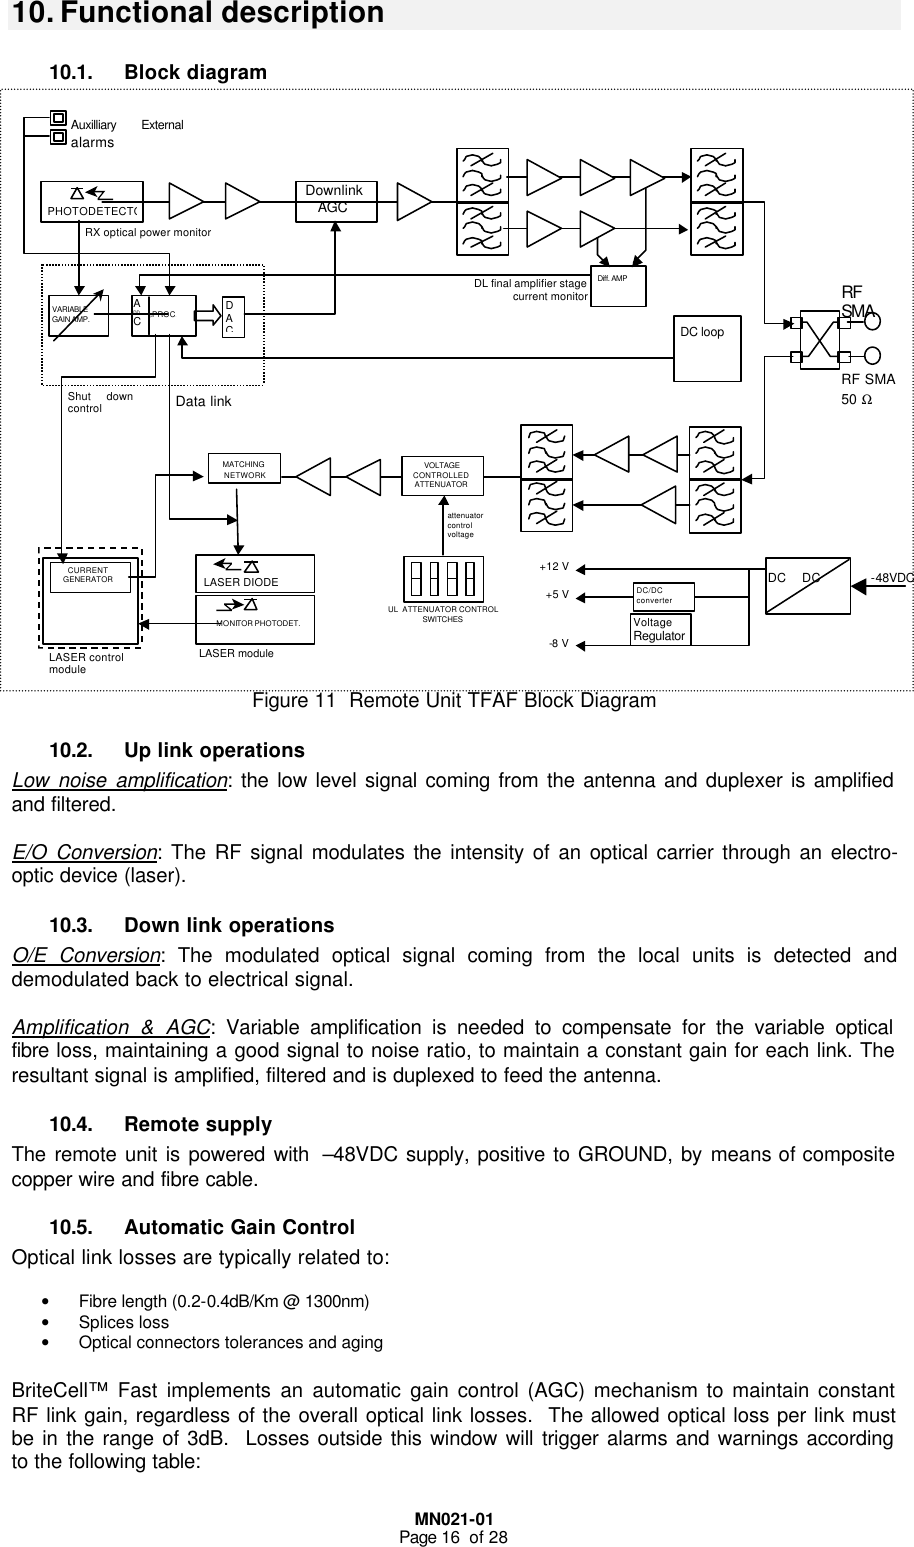  MN021-01 Page 16  of 28  10. Functional description 10.1. Block diagram                          Figure 11  Remote Unit TFAF Block Diagram 10.2. Up link operations Low noise amplification: the low level signal coming from the antenna and duplexer is amplified and filtered.   E/O Conversion: The RF signal modulates the intensity of an optical carrier through an electro-optic device (laser).  10.3. Down link operations O/E Conversion: The modulated optical signal coming from the local units is detected and demodulated back to electrical signal.  Amplification &amp; AGC: Variable amplification is needed to compensate for the variable optical fibre loss, maintaining a good signal to noise ratio, to maintain a constant gain for each link. The resultant signal is amplified, filtered and is duplexed to feed the antenna. 10.4. Remote supply The remote unit is powered with  –48VDC supply, positive to GROUND, by means of composite copper wire and fibre cable.  10.5. Automatic Gain Control  Optical link losses are typically related to:  • Fibre length (0.2-0.4dB/Km @ 1300nm) • Splices loss • Optical connectors tolerances and aging  BriteCell™ Fast implements an automatic gain control (AGC) mechanism to maintain constant RF link gain, regardless of the overall optical link losses.  The allowed optical loss per link must be in the range of 3dB.  Losses outside this window will trigger alarms and warnings according to the following table: DC     DC                -48VDC PHOTODETECTO Downlink AGC VARIABLE GAIN AMP. D A C A DD C µPROC. Diff. AMP LASER moduleMONITOR PHOTODET. LASER DIODE VOLTAGE CONTROLLED ATTENUATOR MATCHING NETWORK UL  ATTENUATOR CONTROL SWITCHES attenuator control voltage DL final amplifier stage current monitorRF SMA  RF SMA 50 Ω Data link DC/DC converter Voltage Regulator RX optical power monitor  Shut down control CURRENT GENERATOR LASER control module +12 V-8 V+5 VAuxilliary Externalalarms DC loop 